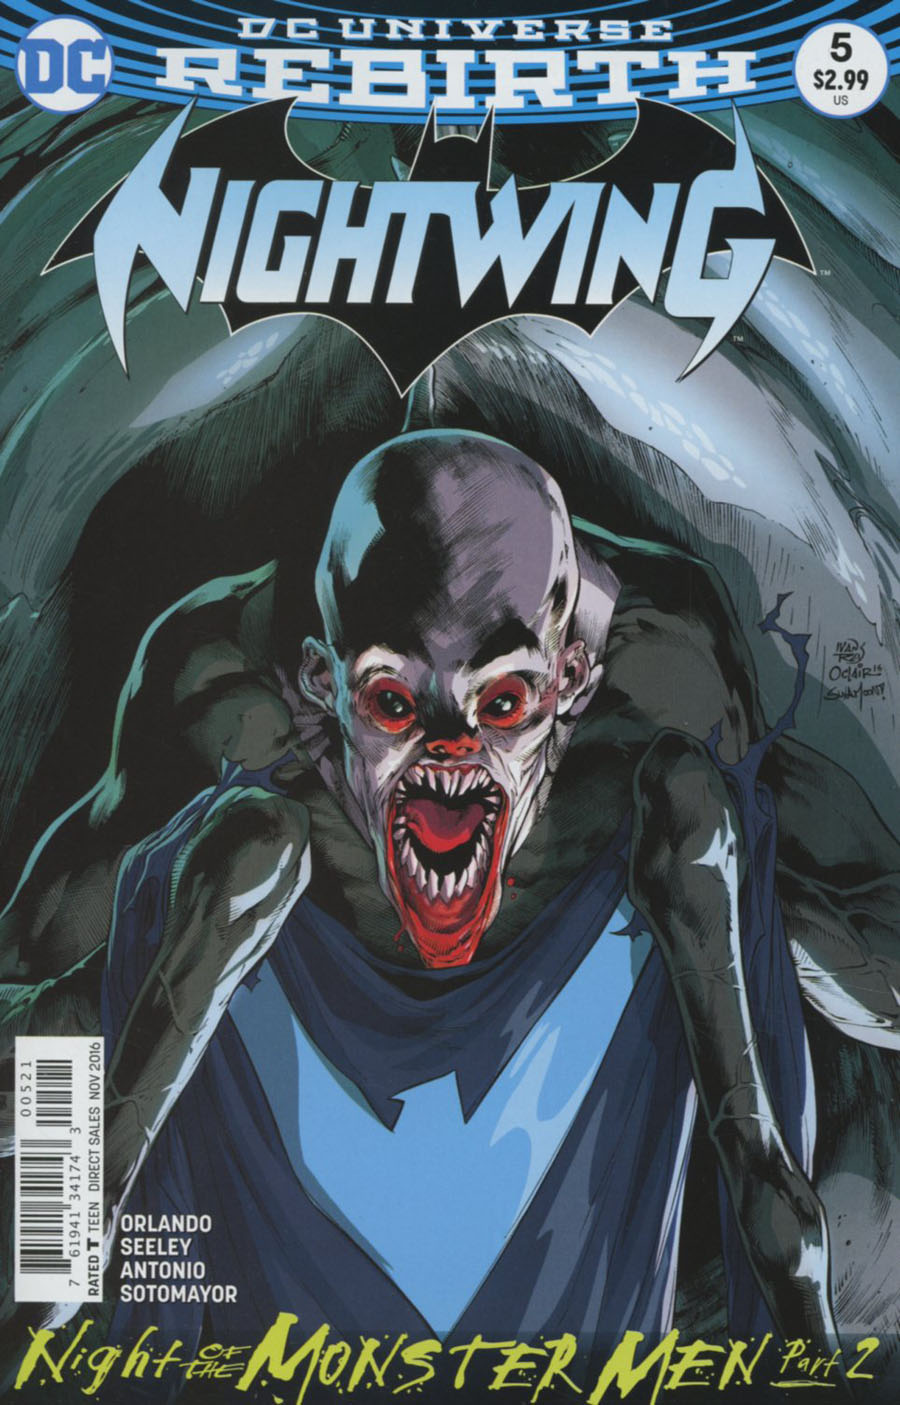 Nightwing Vol 4 #5 Cover B Variant Ivan Reis Cover (Night Of The Monster Men Part 2)